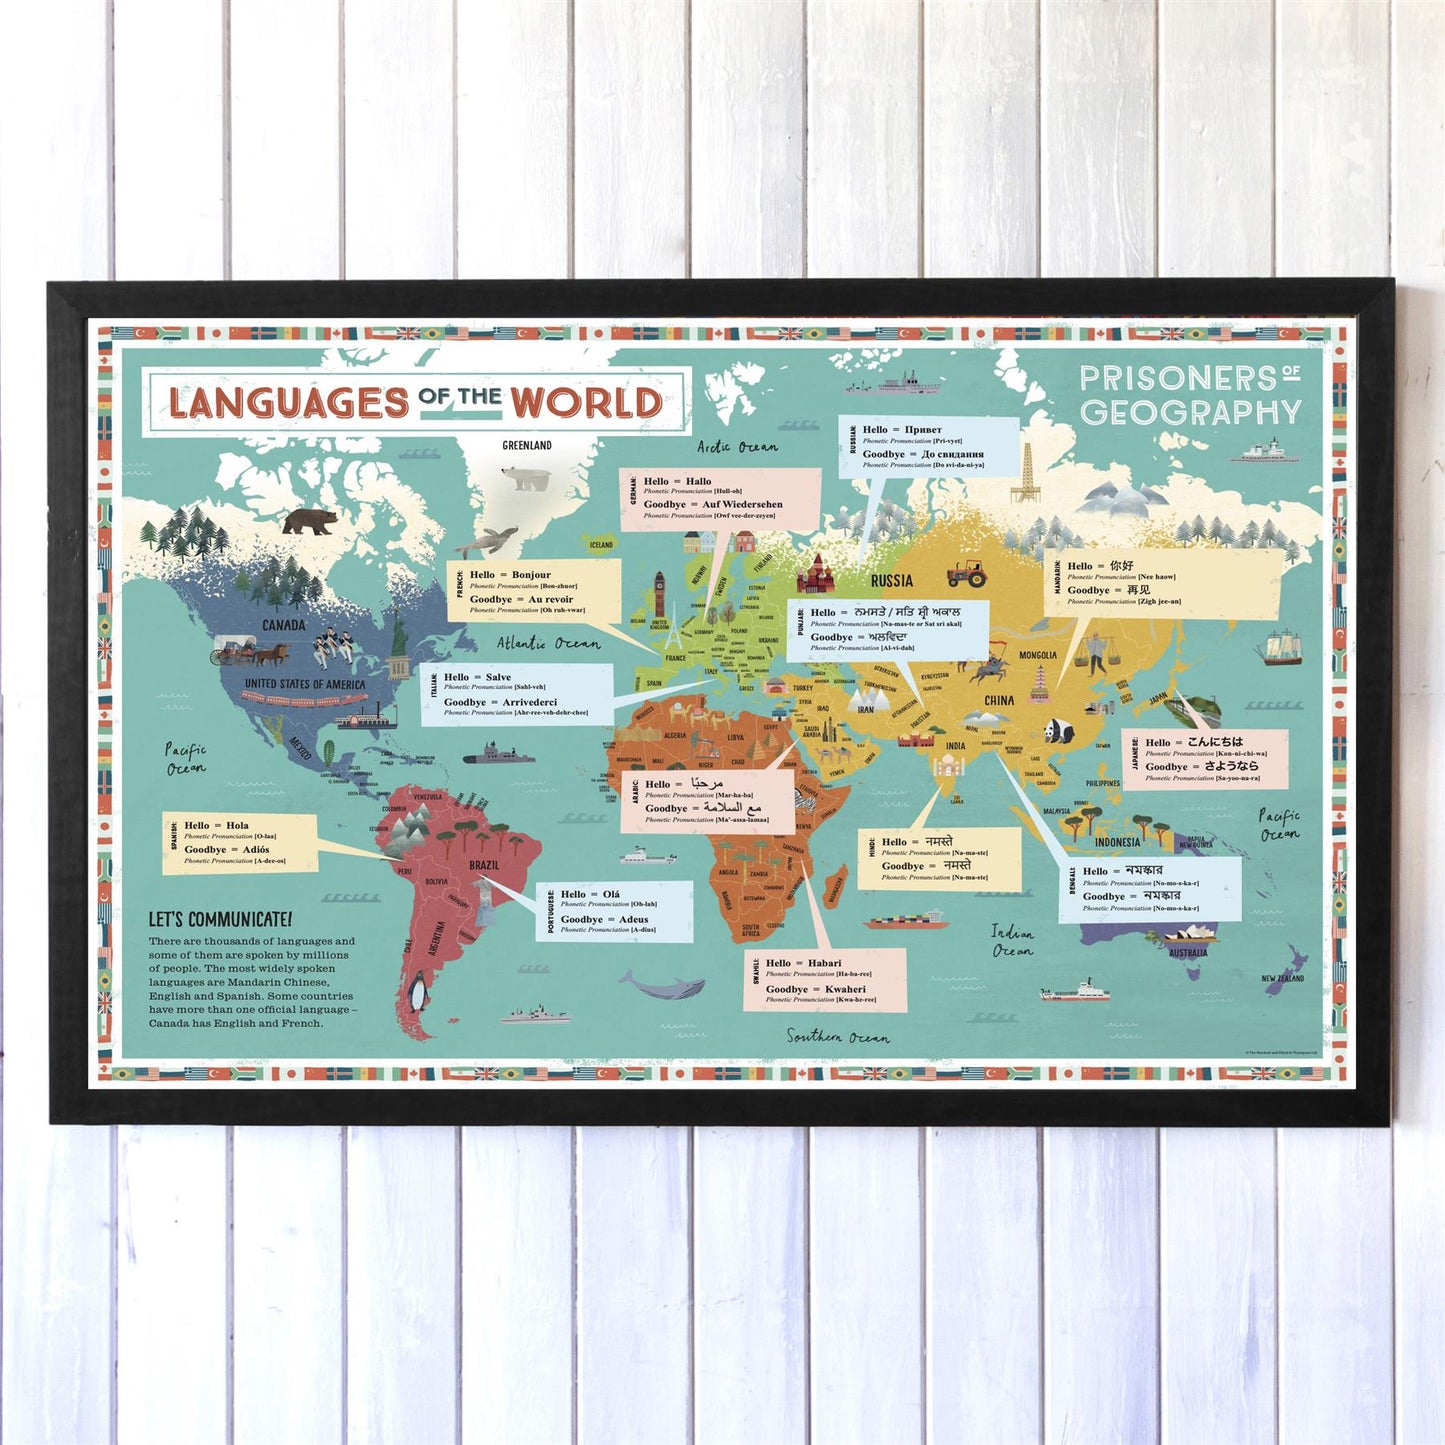 Languages Of The World Educational Wall Map - Prisoners of Geography